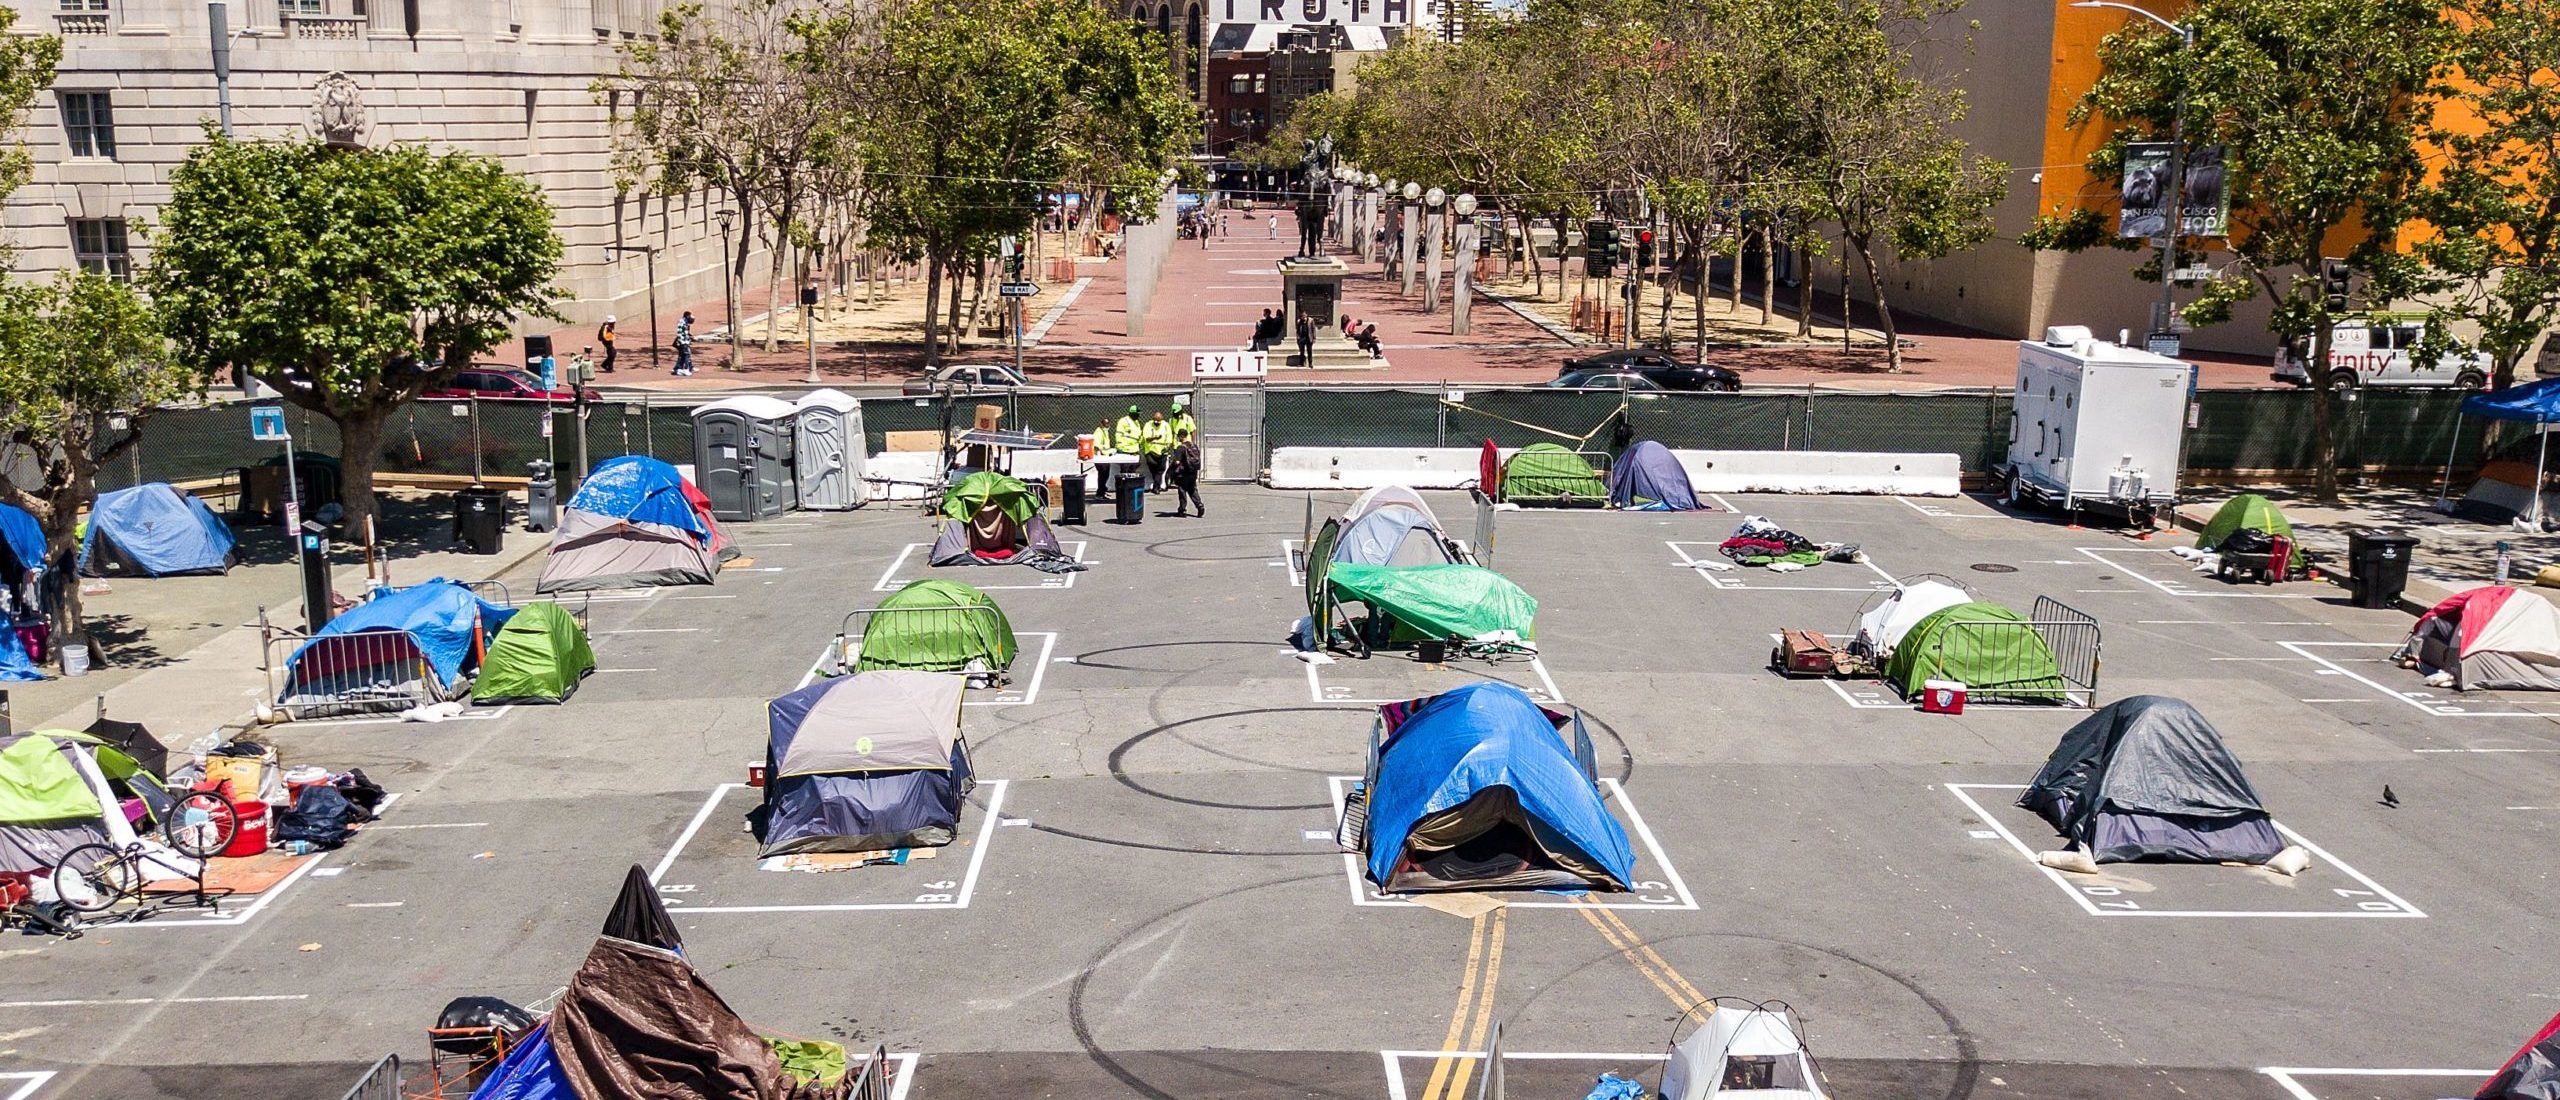 Rectangles are painted on the ground to encourage homeless people to keep social distancing at a city-sanctioned homeless encampment across from City Hall in San Francisco, California, on May 22, 2020.